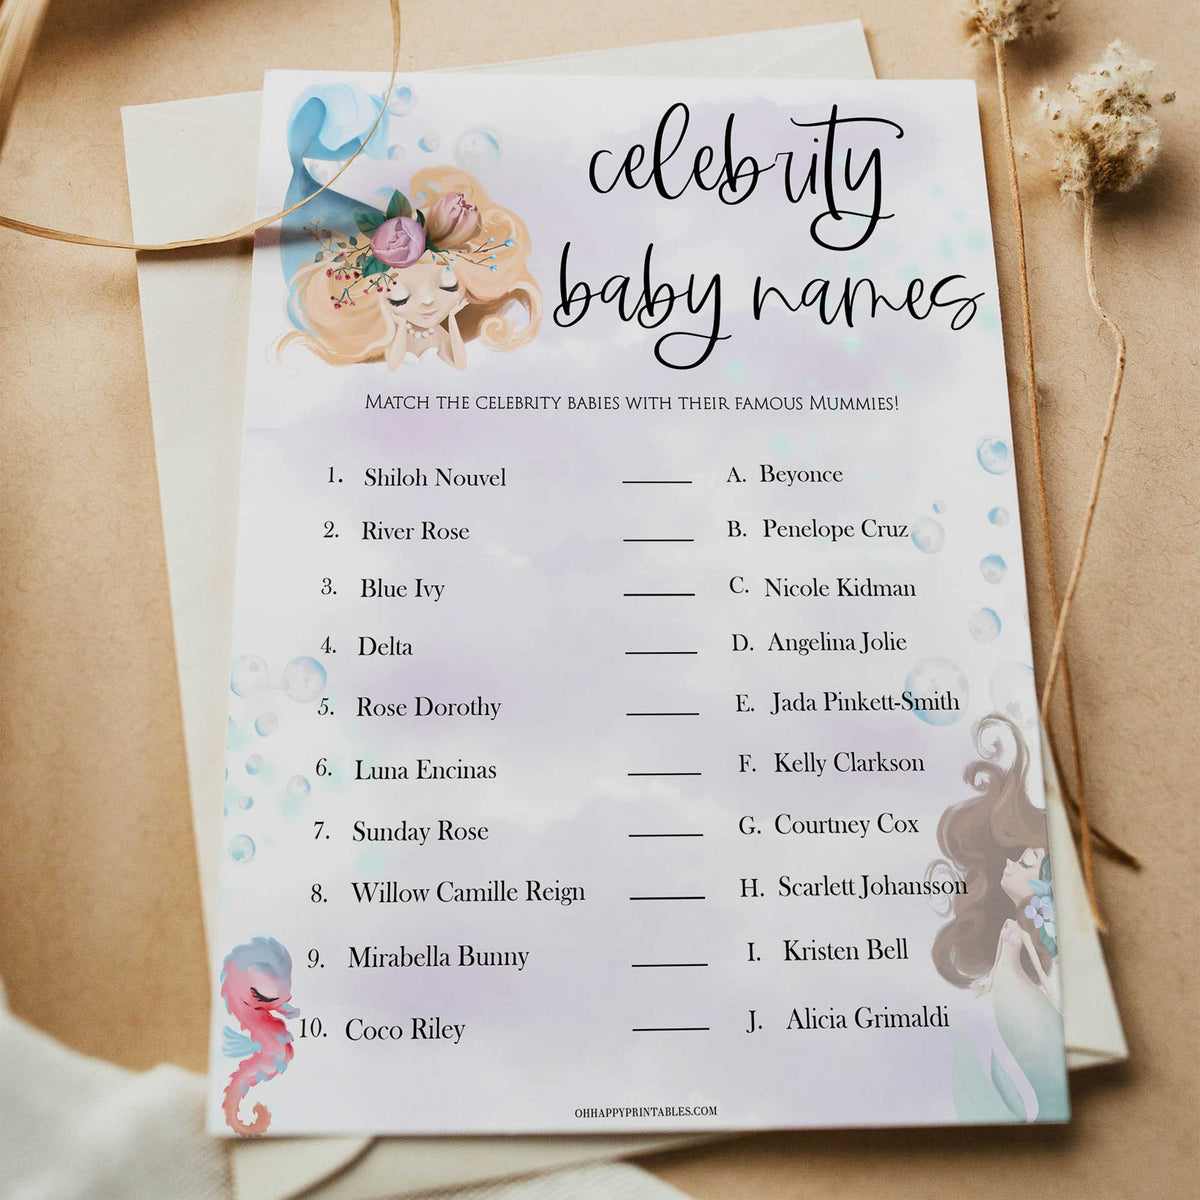 celebrity baby names game, Printable baby shower games, little mermaid baby games, baby shower games, fun baby shower ideas, top baby shower ideas, little mermaid baby shower, baby shower games, pink hearts baby shower ideas